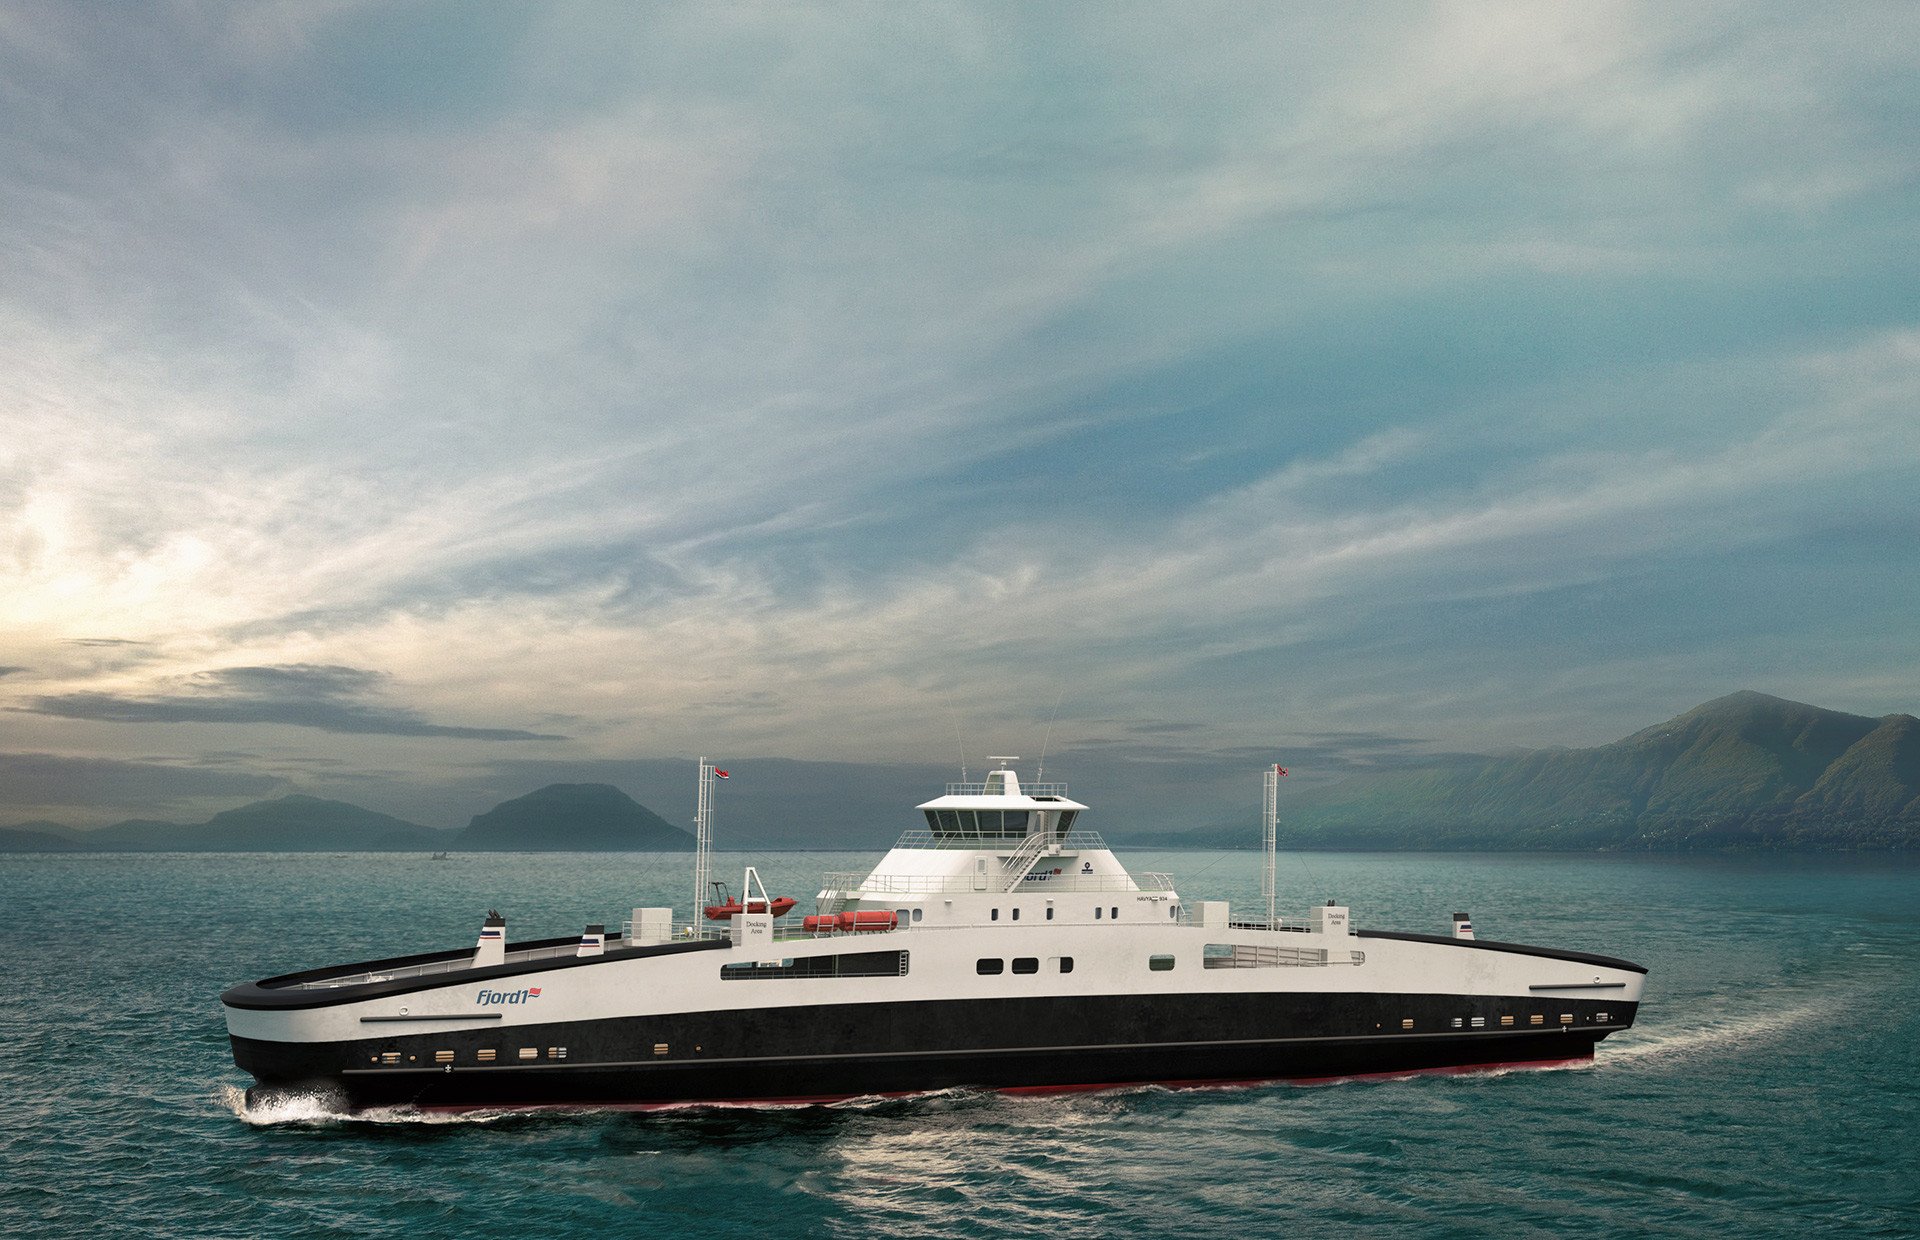 Two full electric driven ferry contracts are signed with Fjord1 !